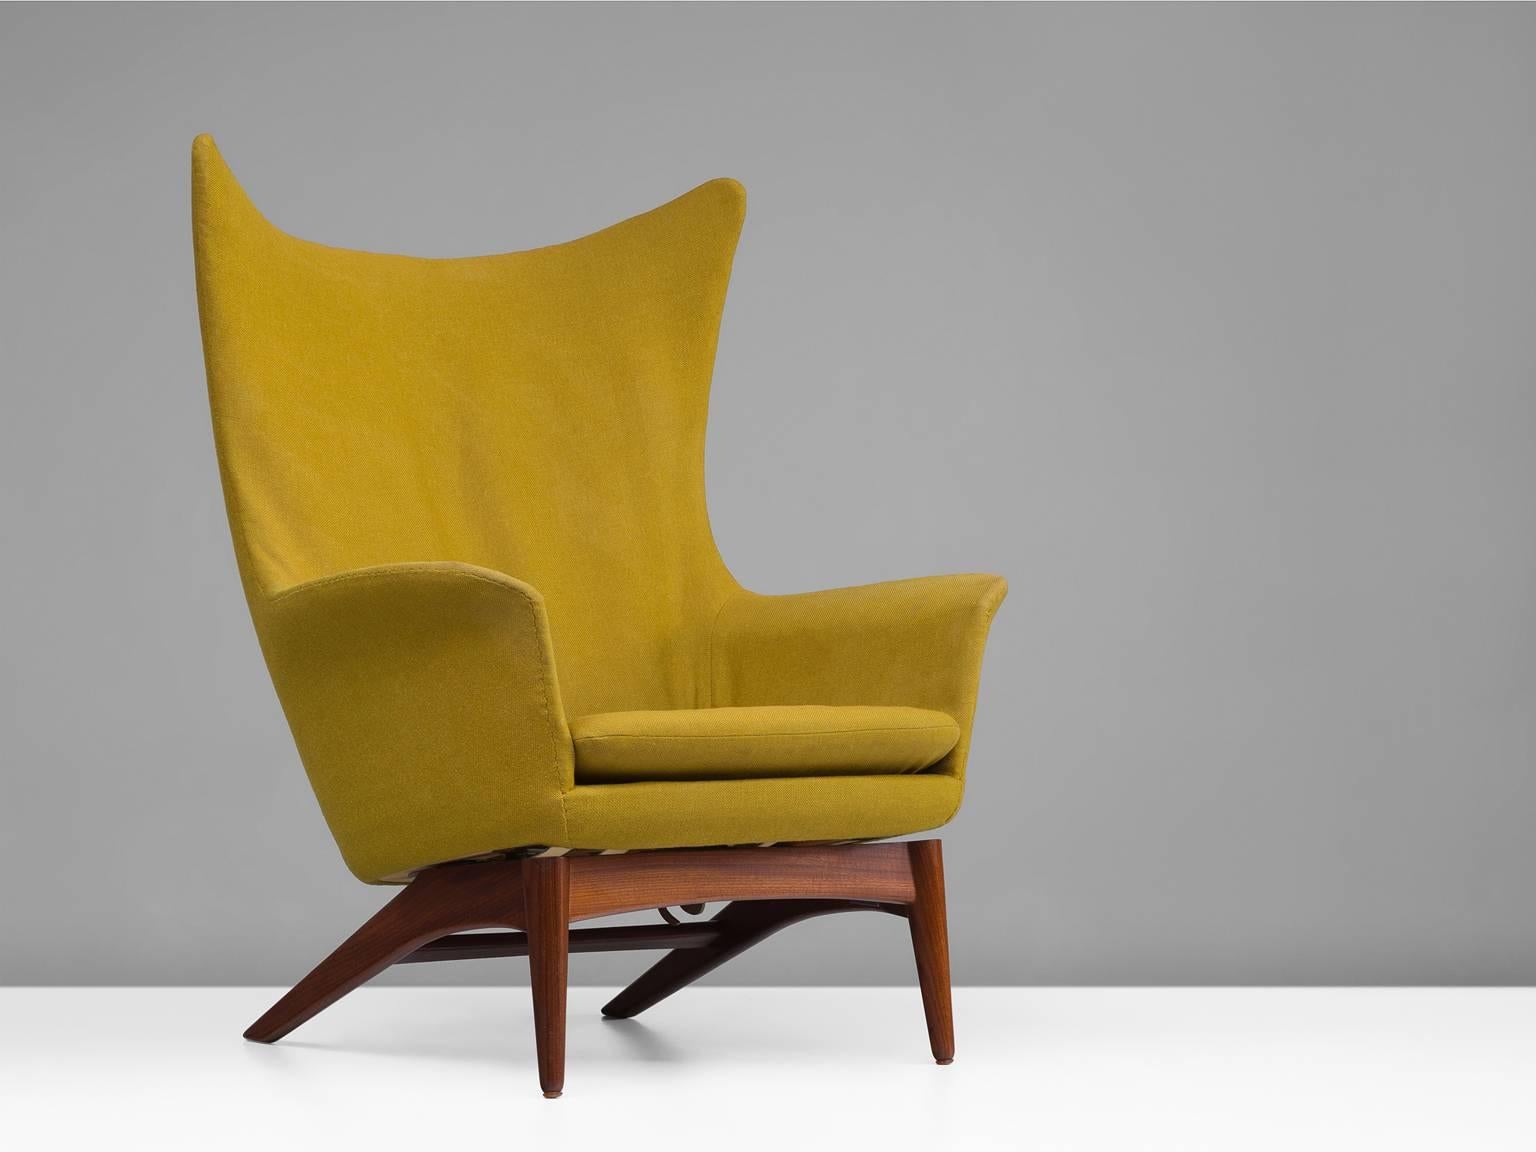 Easy chair model 207. Teak base wit tilt function. Seat and back upholstered in wool, produced by Bramin-Møbler, N. A. Jørgensens Møbelfabrik, Denmark, 1950s

This yellow upholstered armchair is archetypical for Mid-Century Danish design. The teak